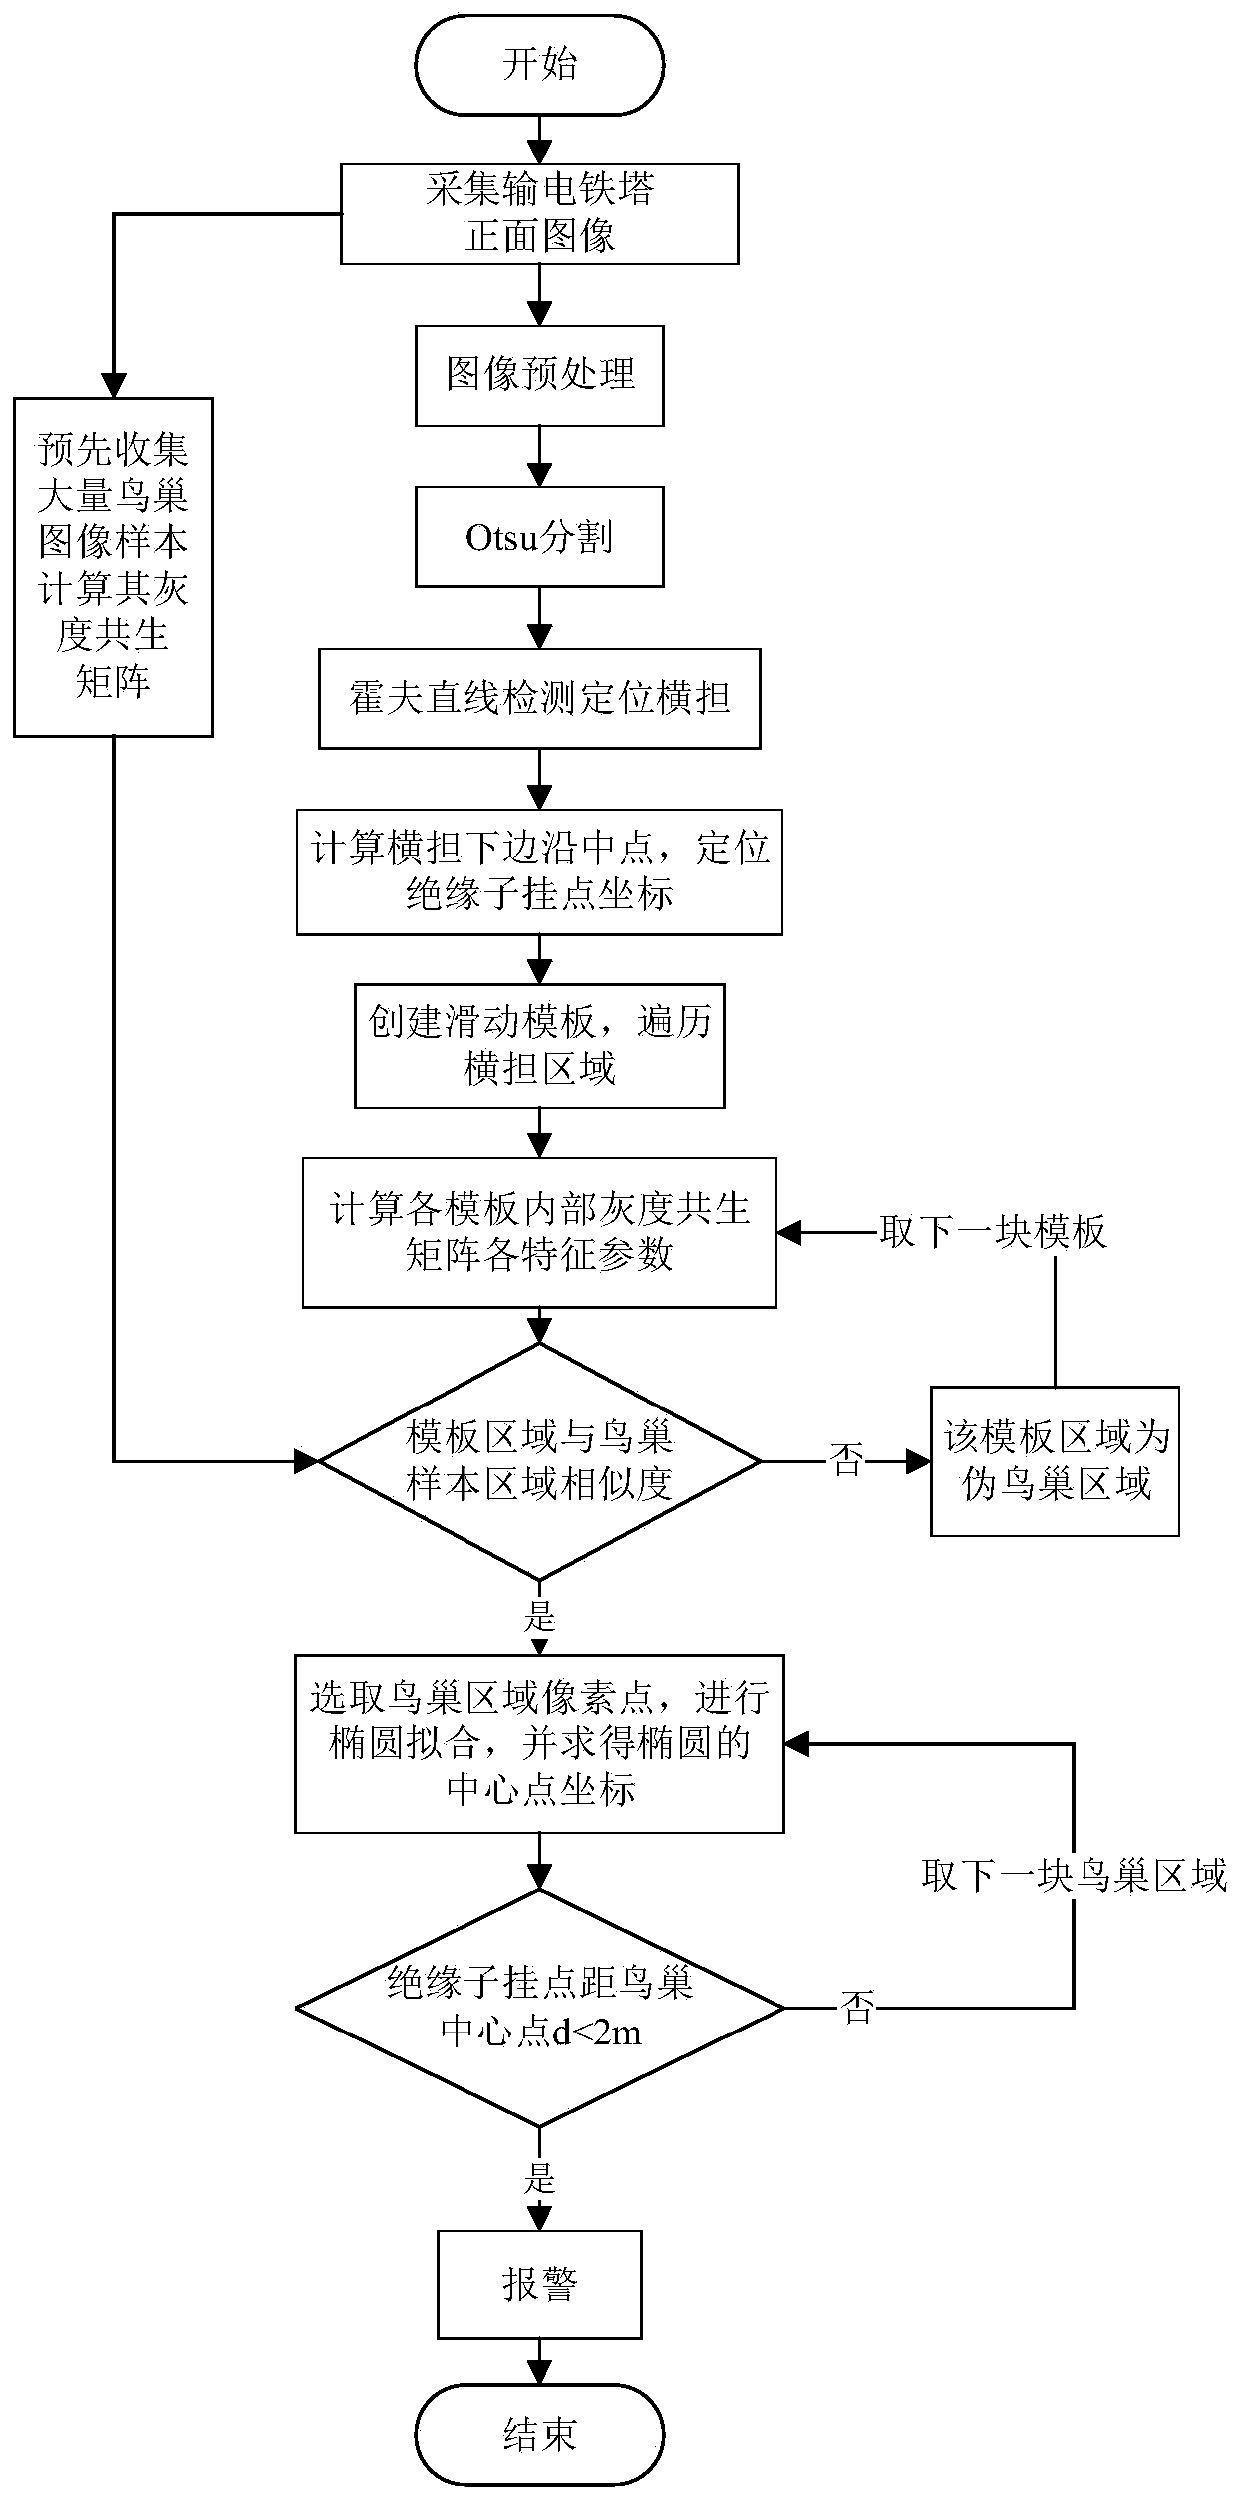 Bird nest positioning and early fault warning method for power transmission tower